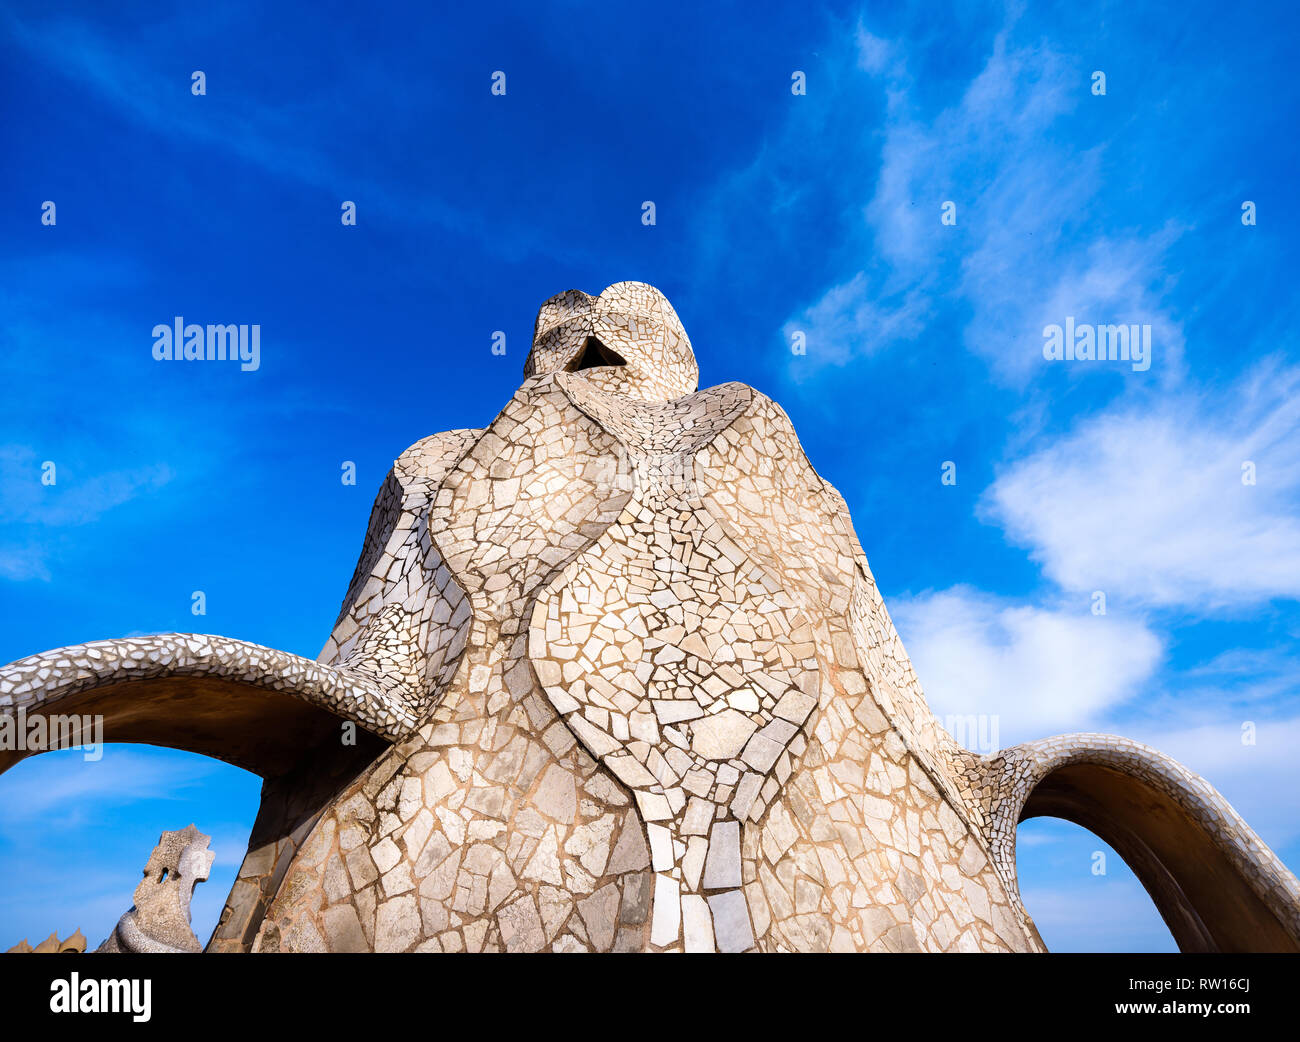 BARCELONA, SPAIN - CIRCA MAY 2018: Detail of ventilation towers in La Pedrera, also known as Casa Mila or The Stone Quarry. Stock Photo